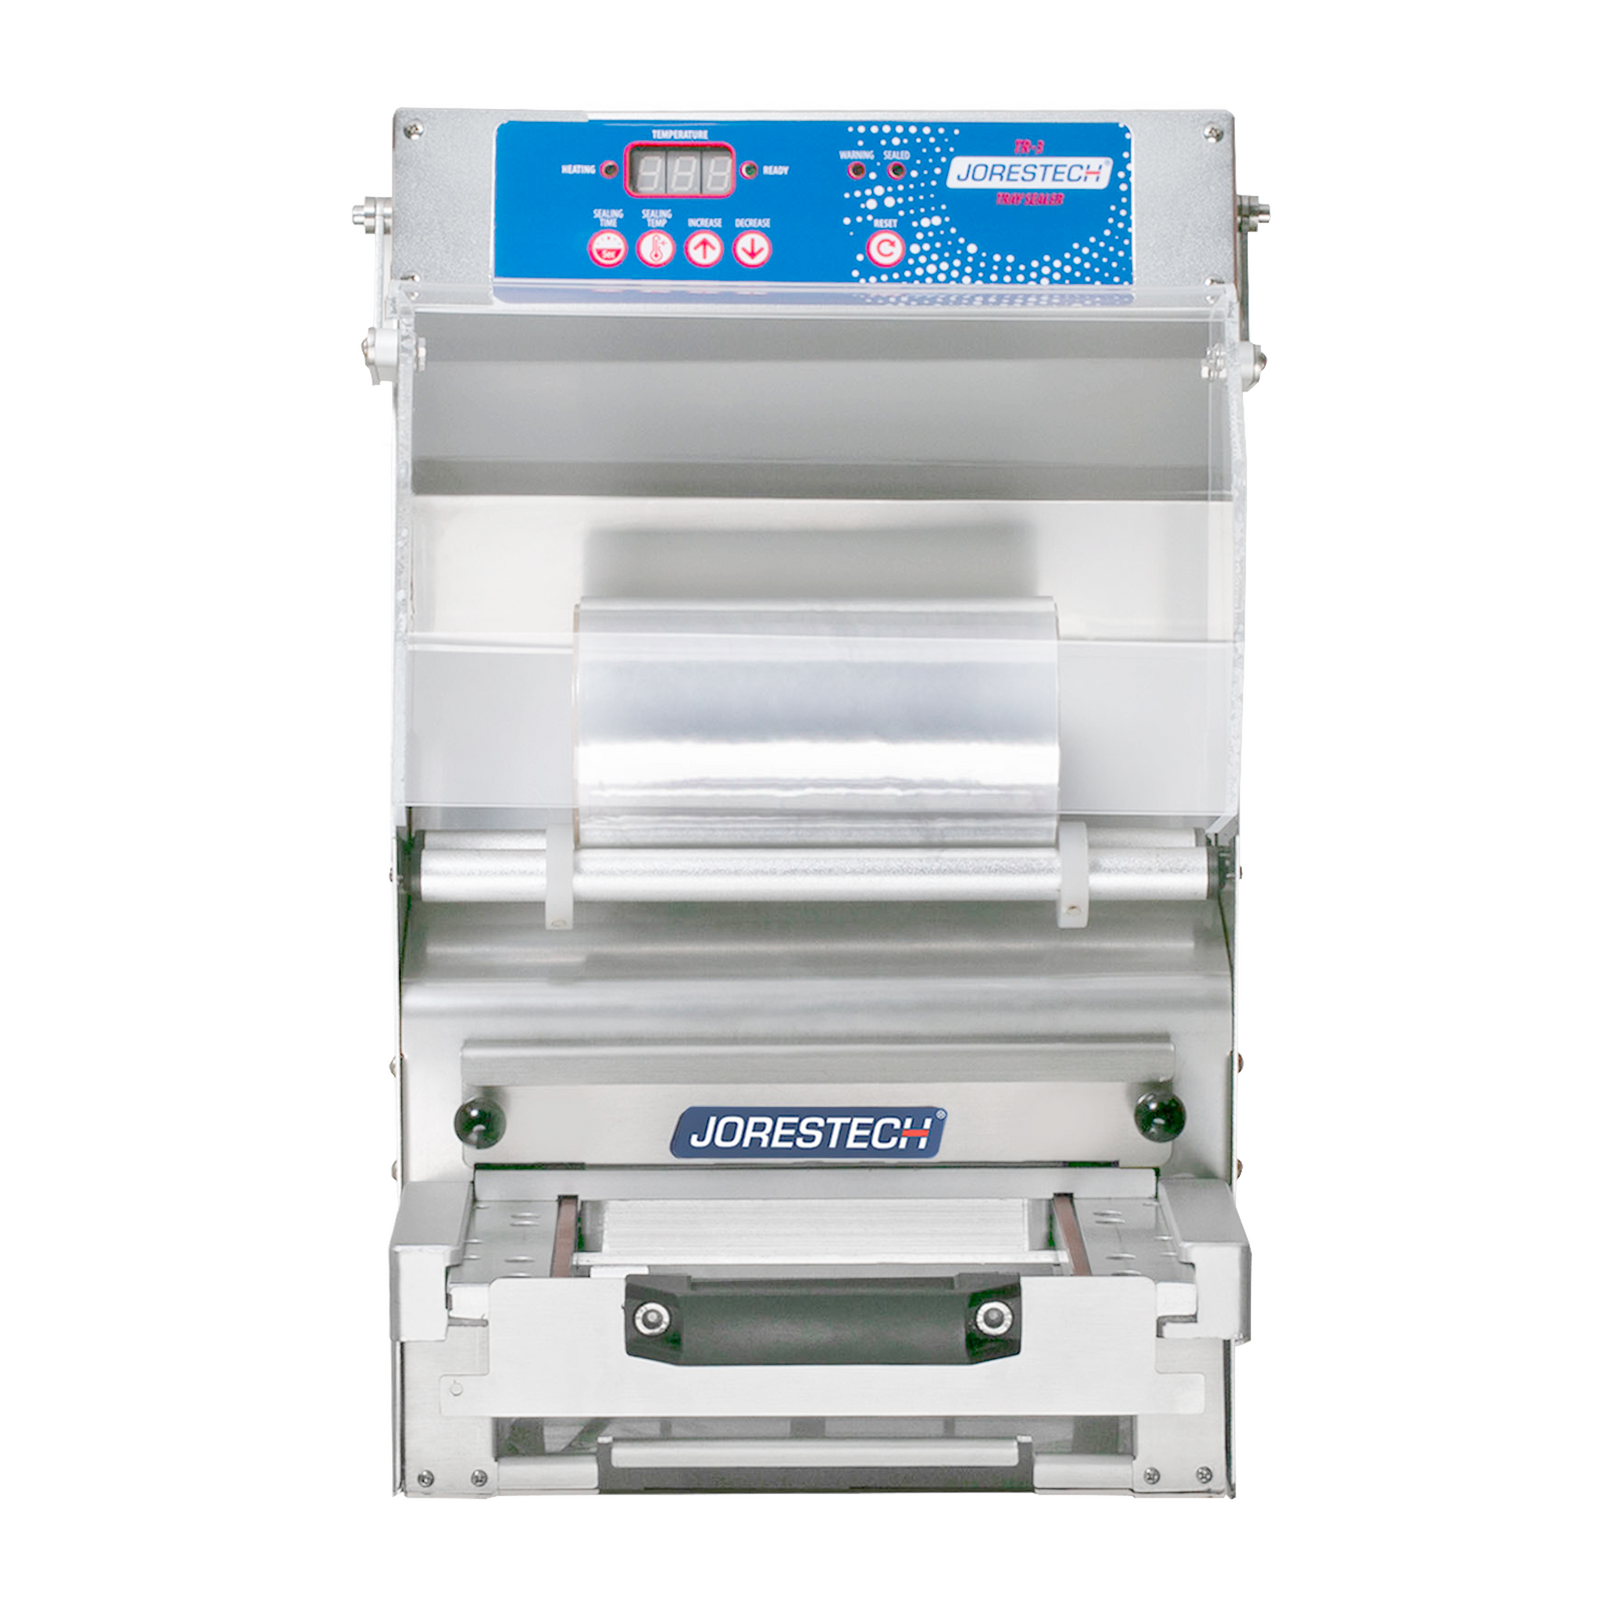 front view of stainless steel packaging tray sealer with blue control panel